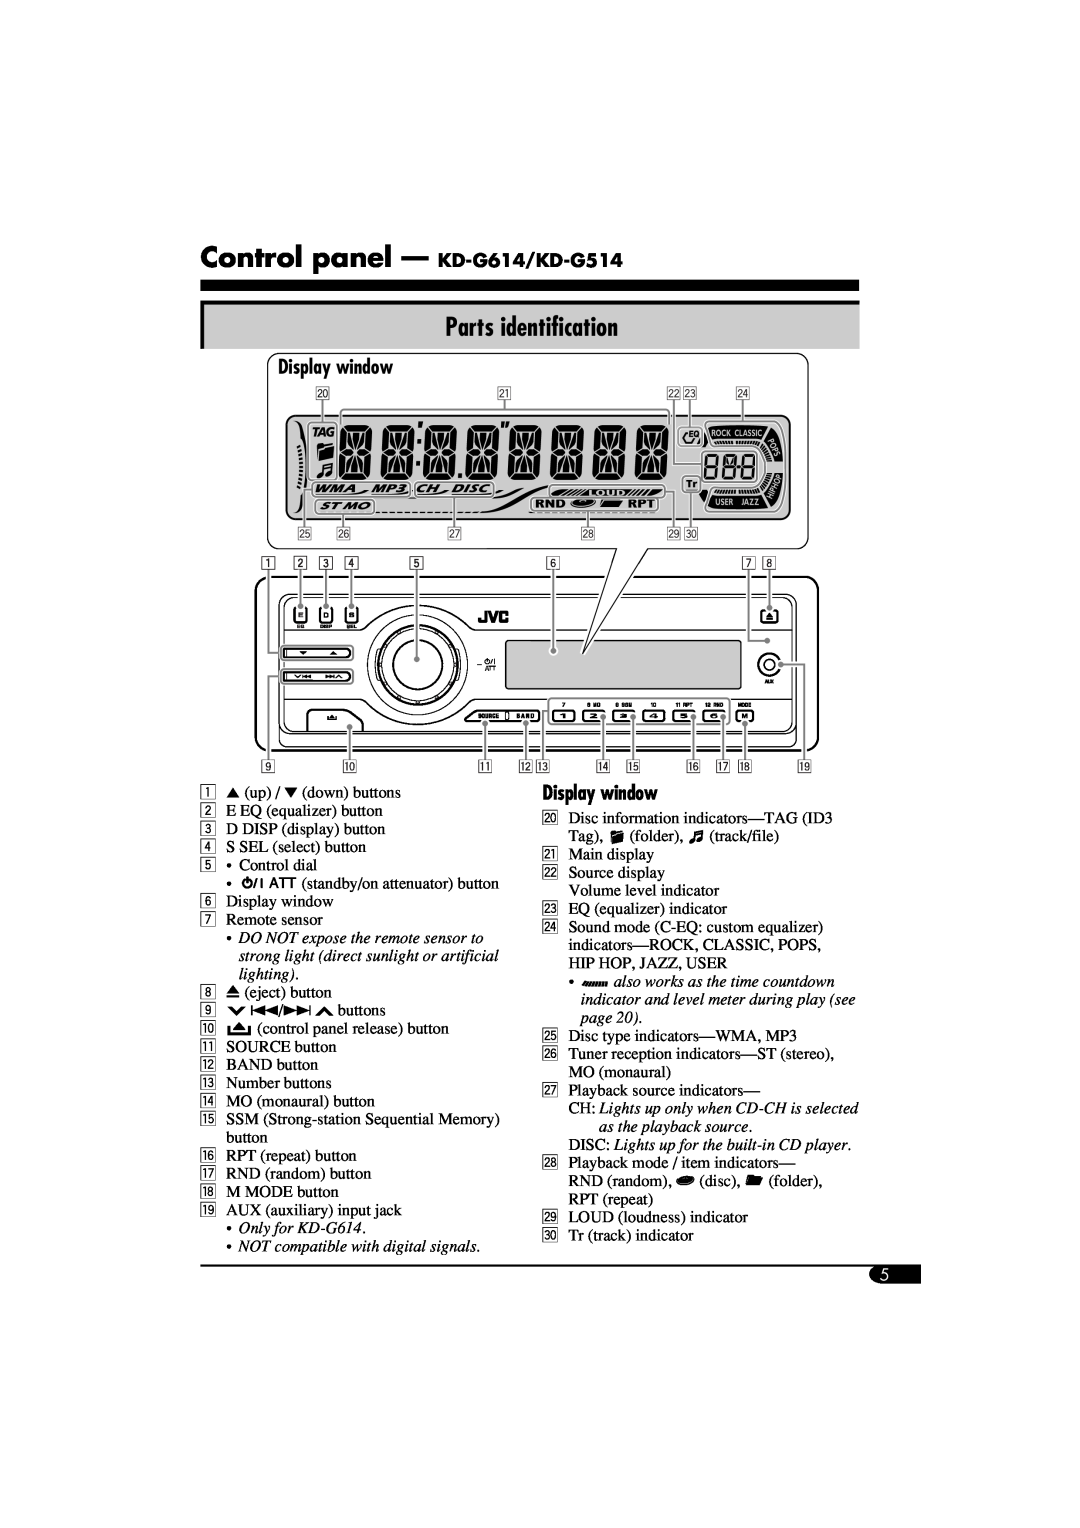 JVC Control panel - KD-G614/KD-G514, Parts identification, Display window, lighting, also works as the time countdown 